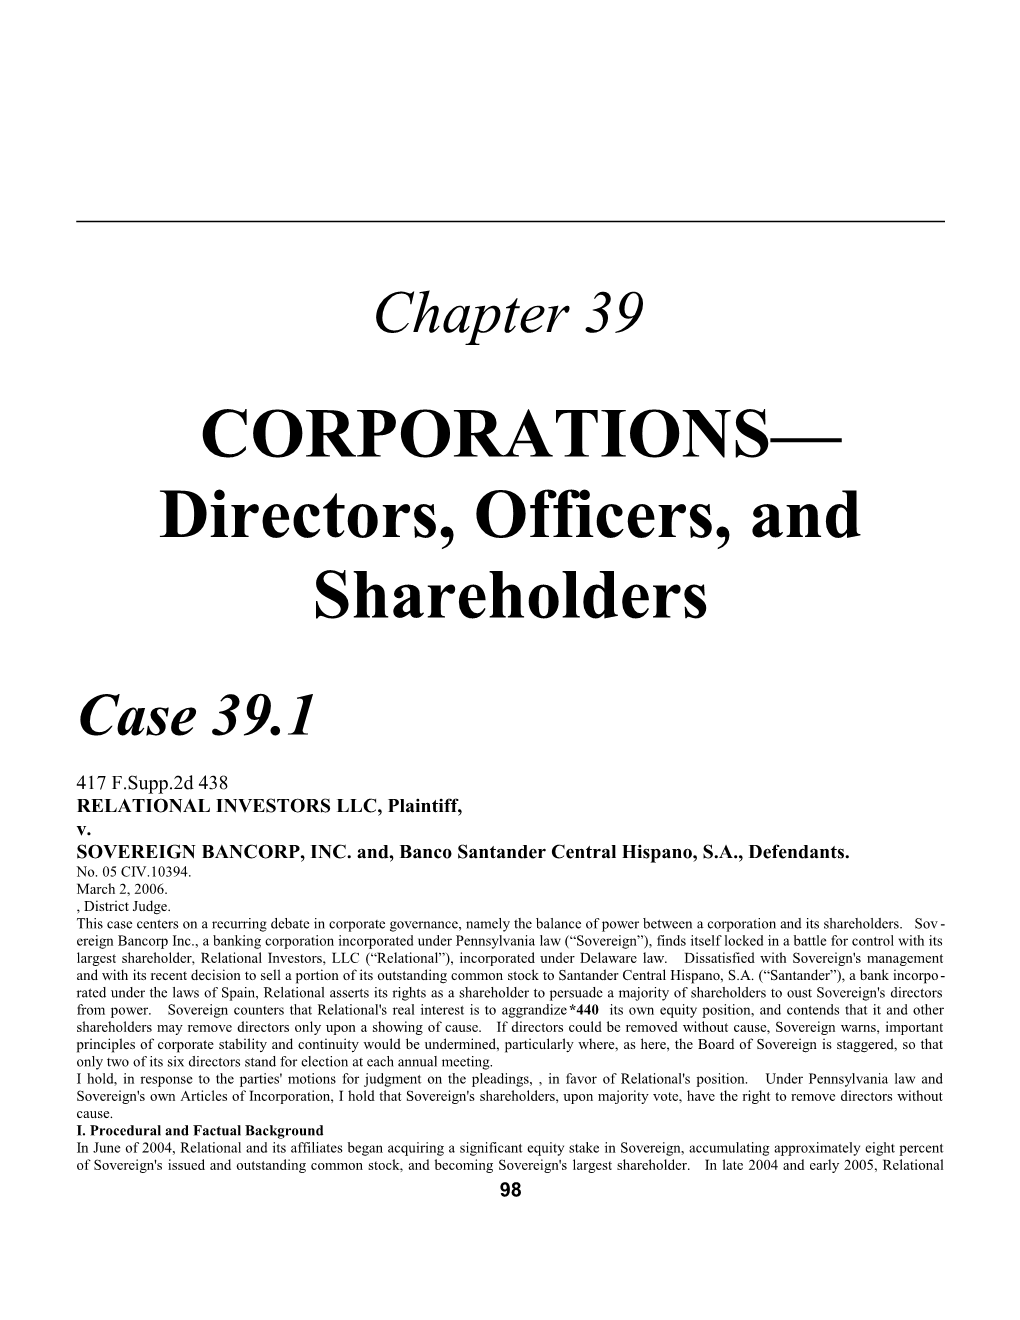 Directors, Officers, and Shareholders